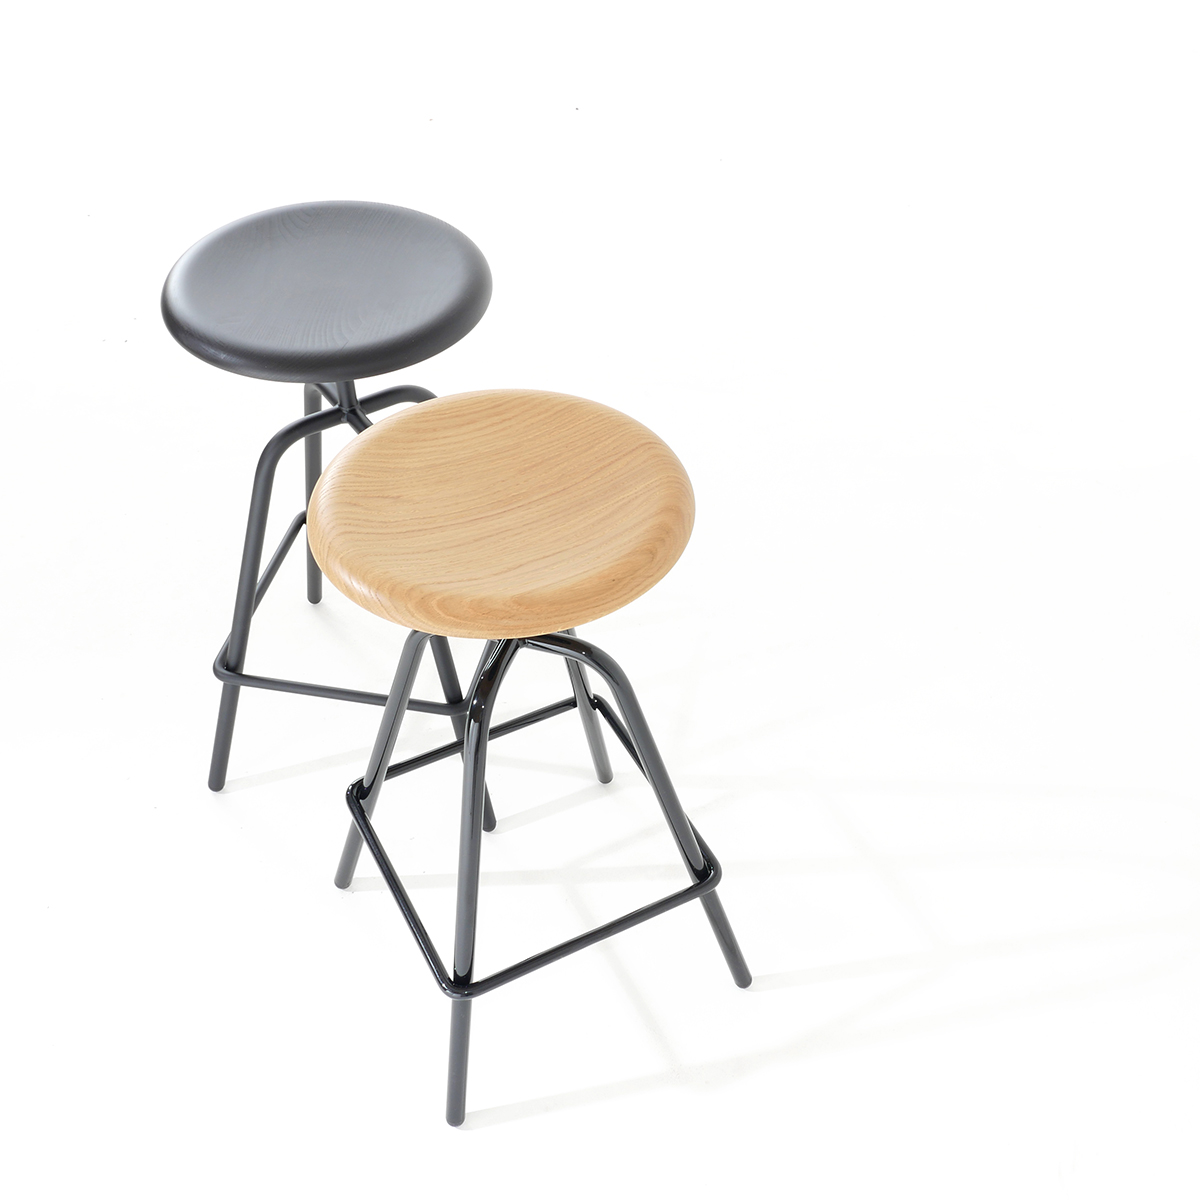 This stool is inspired by the designs and models of industrial furniture of the ’30s.Simple, clear and timeless, the tubular steel frame is secure and robust on 4 legs. With its simple appearance, can be used in almost any home or professional places. The seat is made of solid wood shaped to ensure the right comfort.Simple, clear and timeless, the tubular steel frame is secure and robust on 4 legs. With its simple appearance, can be used in almost any home or professional places. The seat is made of solid wood shaped to ensure the right comfort.Simple, clear and timeless, the tubular steel frame is secure and robust on 4 legs. With its simple appearance, can be used in almost any home or professional places. The seat is made of solid wood shaped to ensure the right comfort.